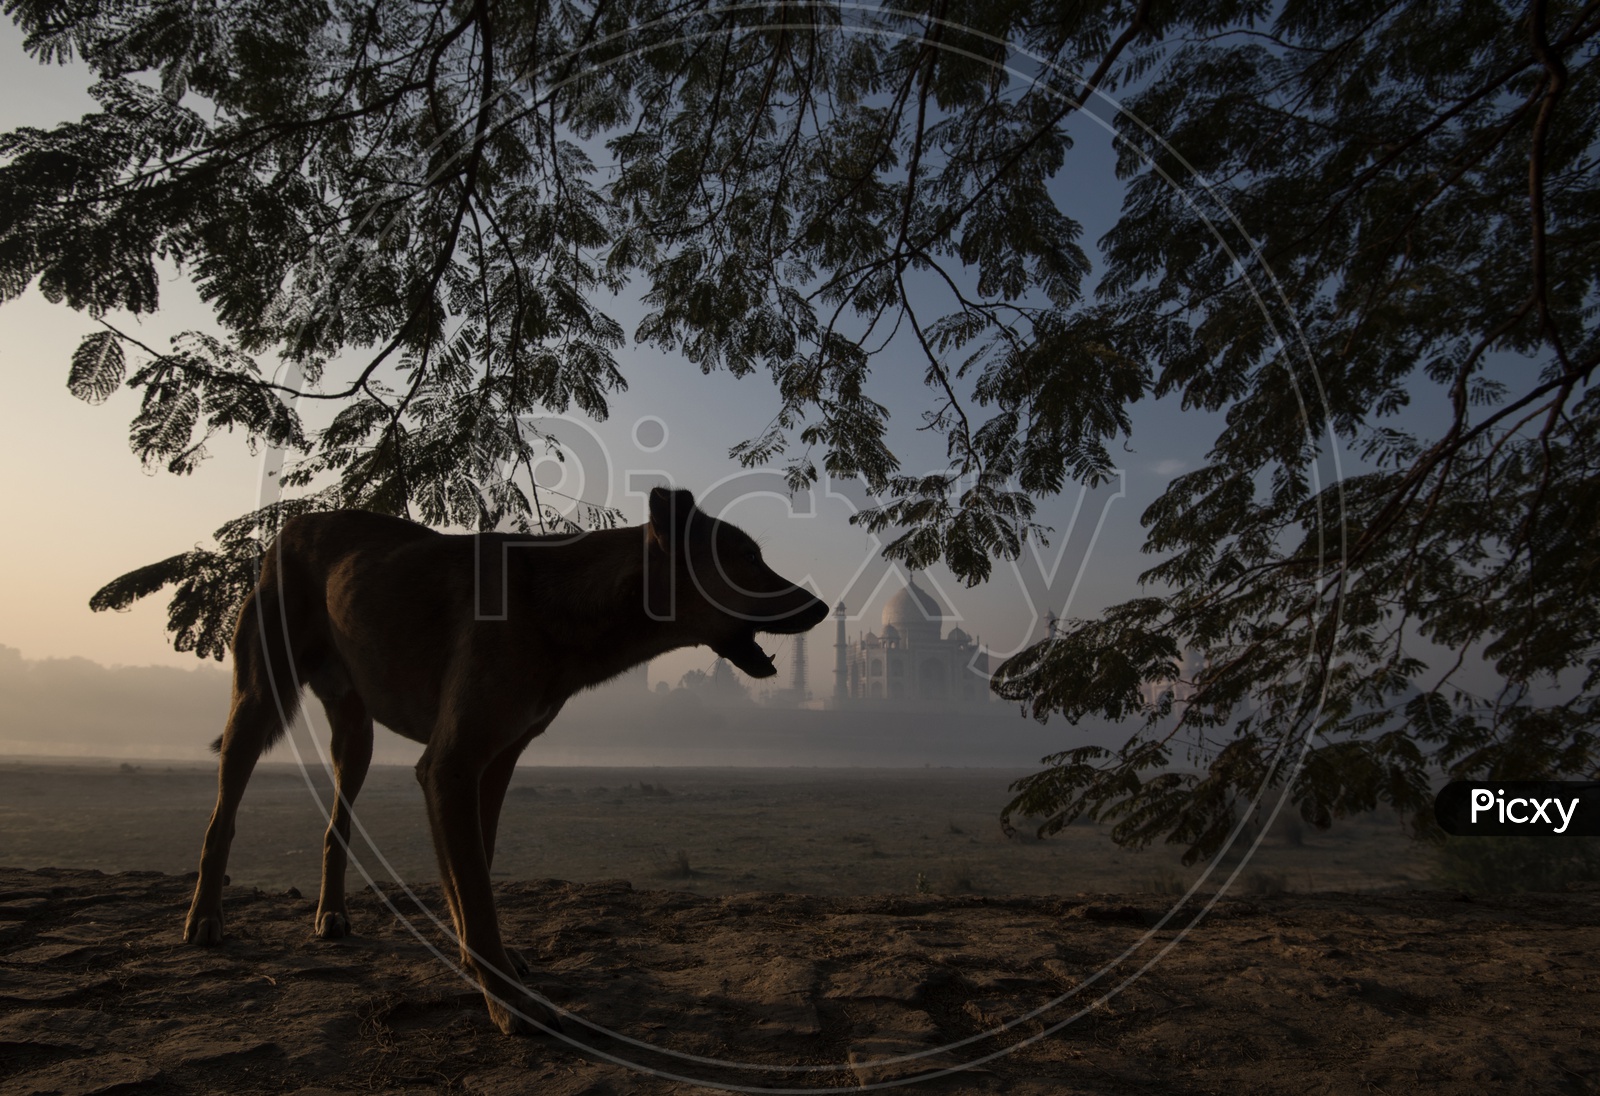 Street Dog under a Tree and Taj Mahal in Background